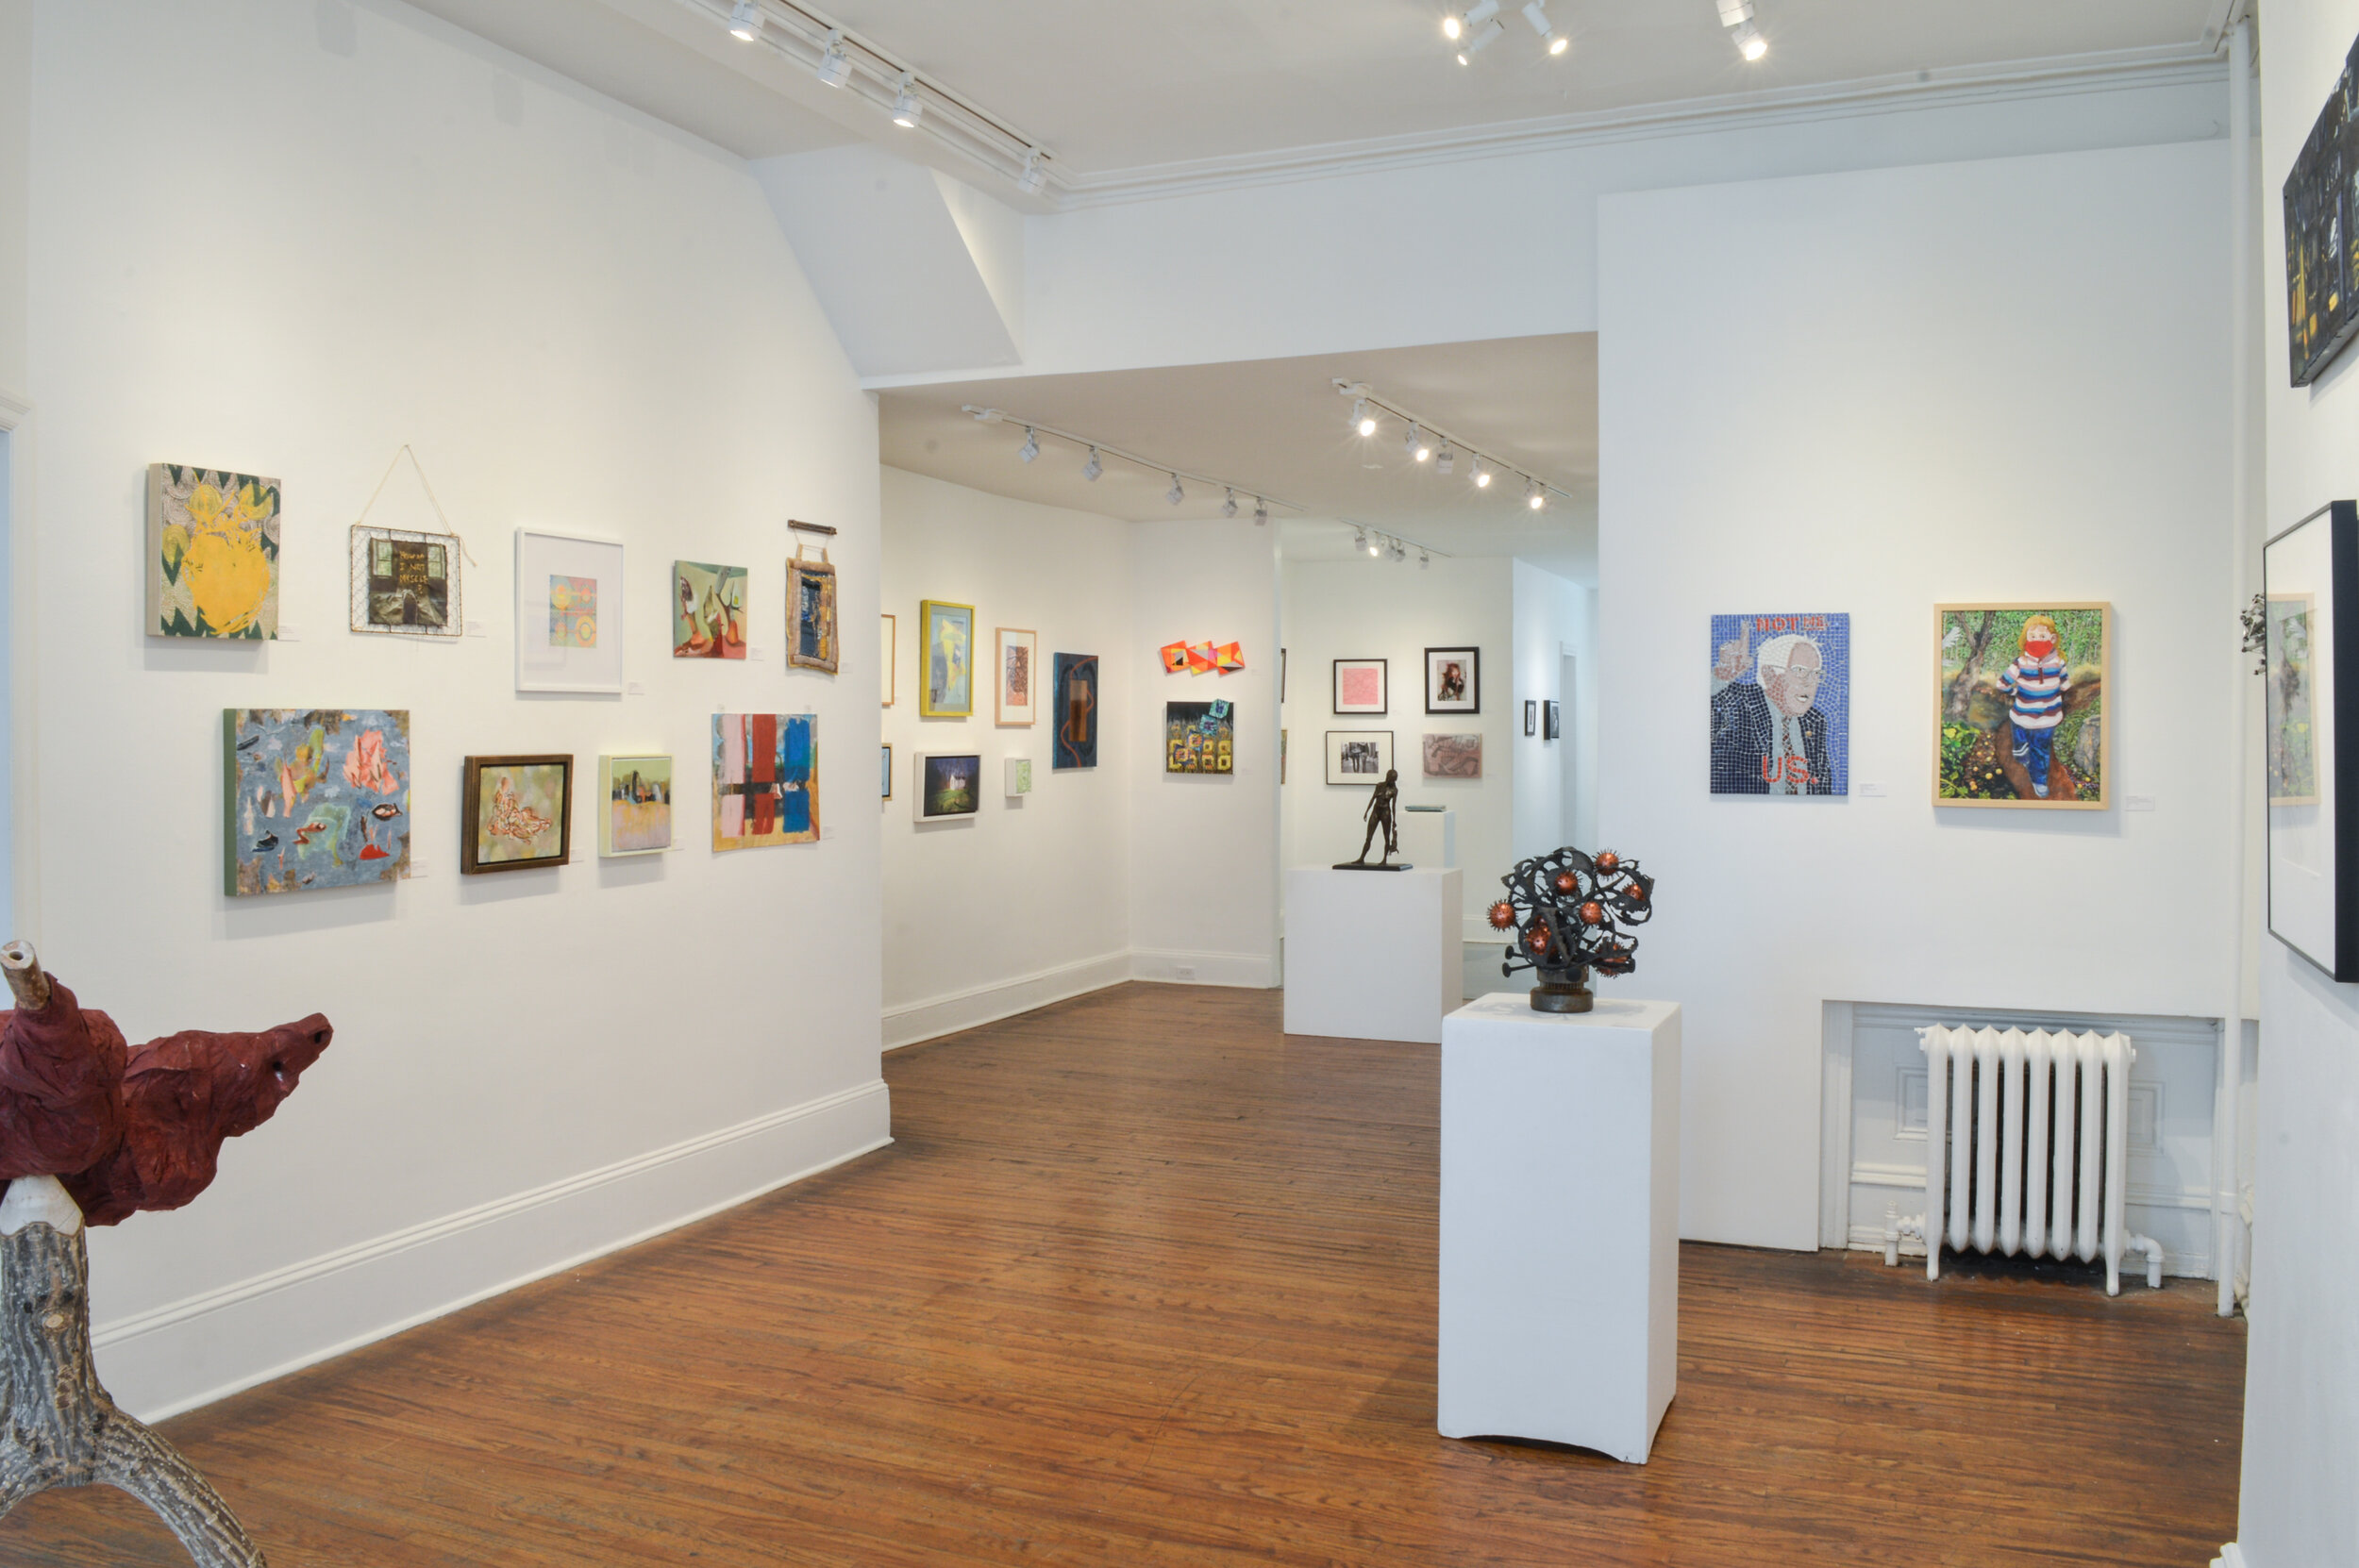  Art gallery in Philadelphia presents a new exhibition in their Bella Vista location with works for sale through SHOP DVAA. 